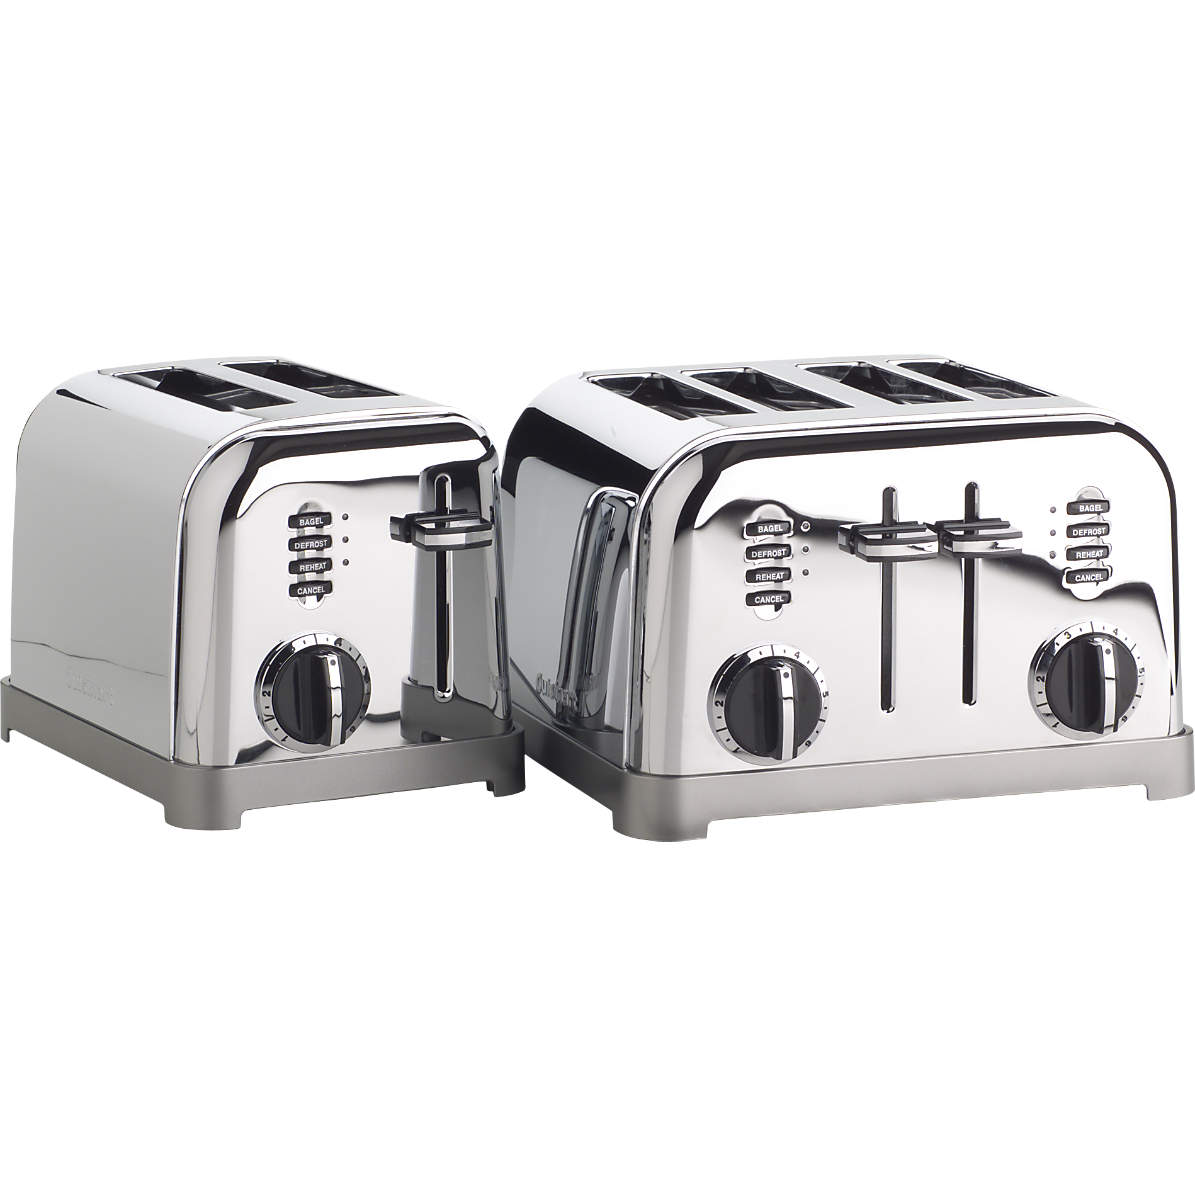 Detail Images Of Toasters Nomer 10